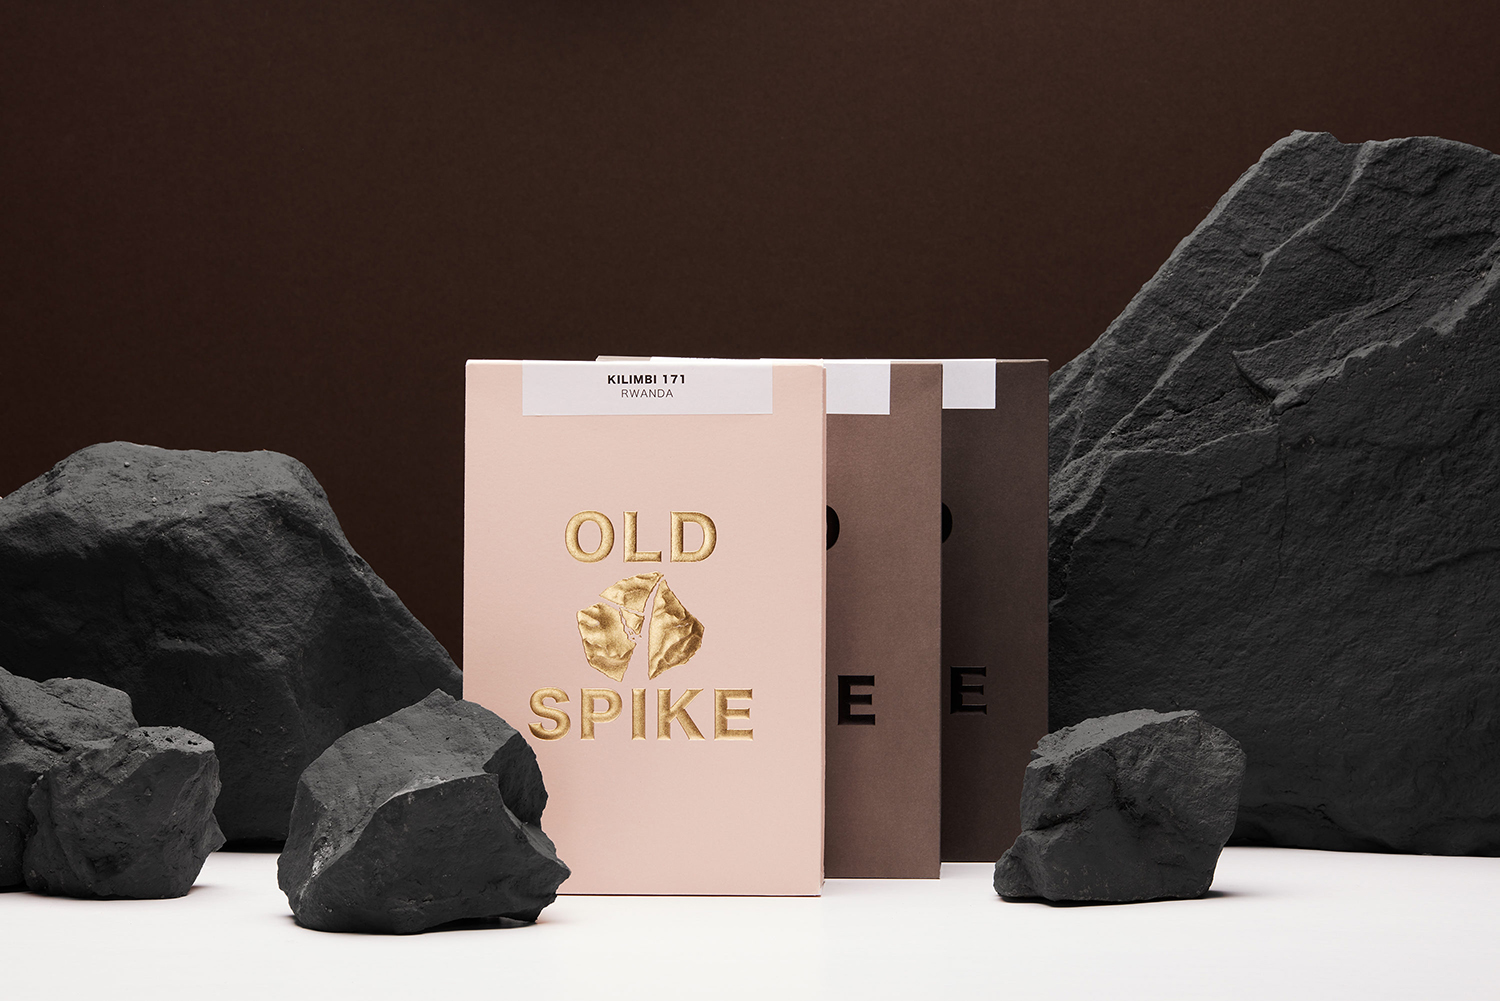 Modern Luxury Packaging – Old Spike by Commission Studio, United Kingdom